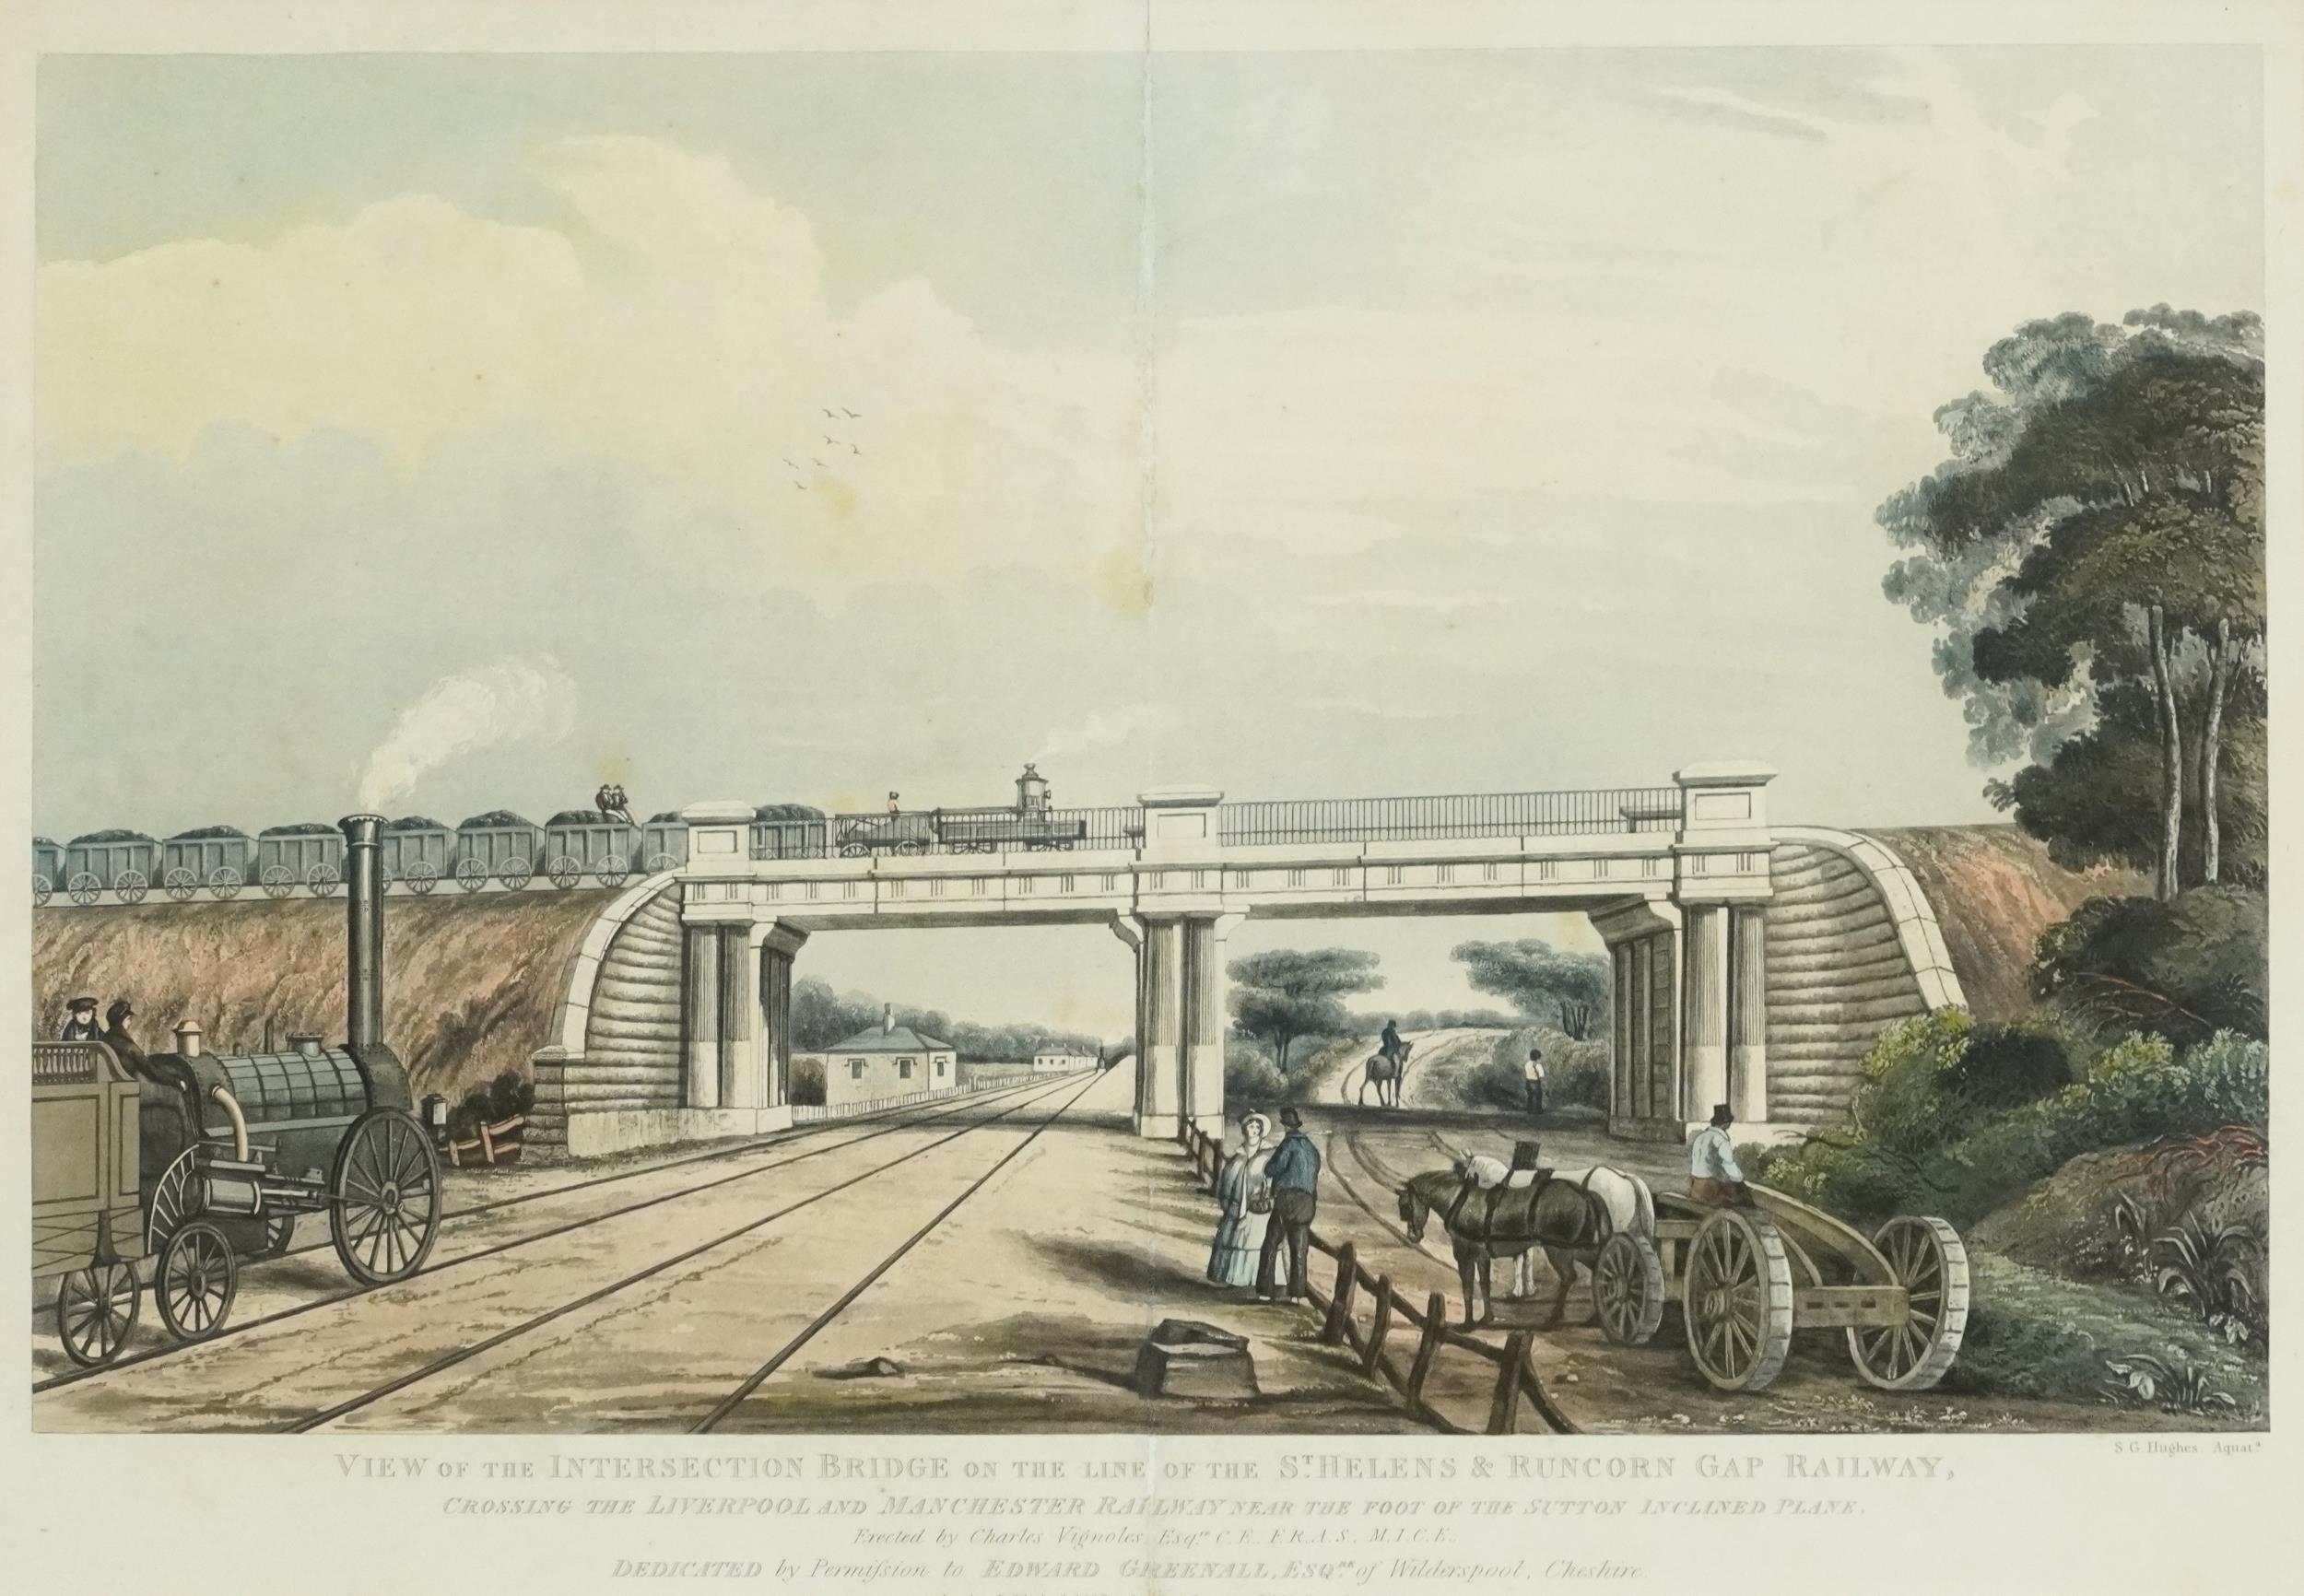 View of the intersection bridge on the line of the St Helen's and Runcorn Gap railway, early 19th